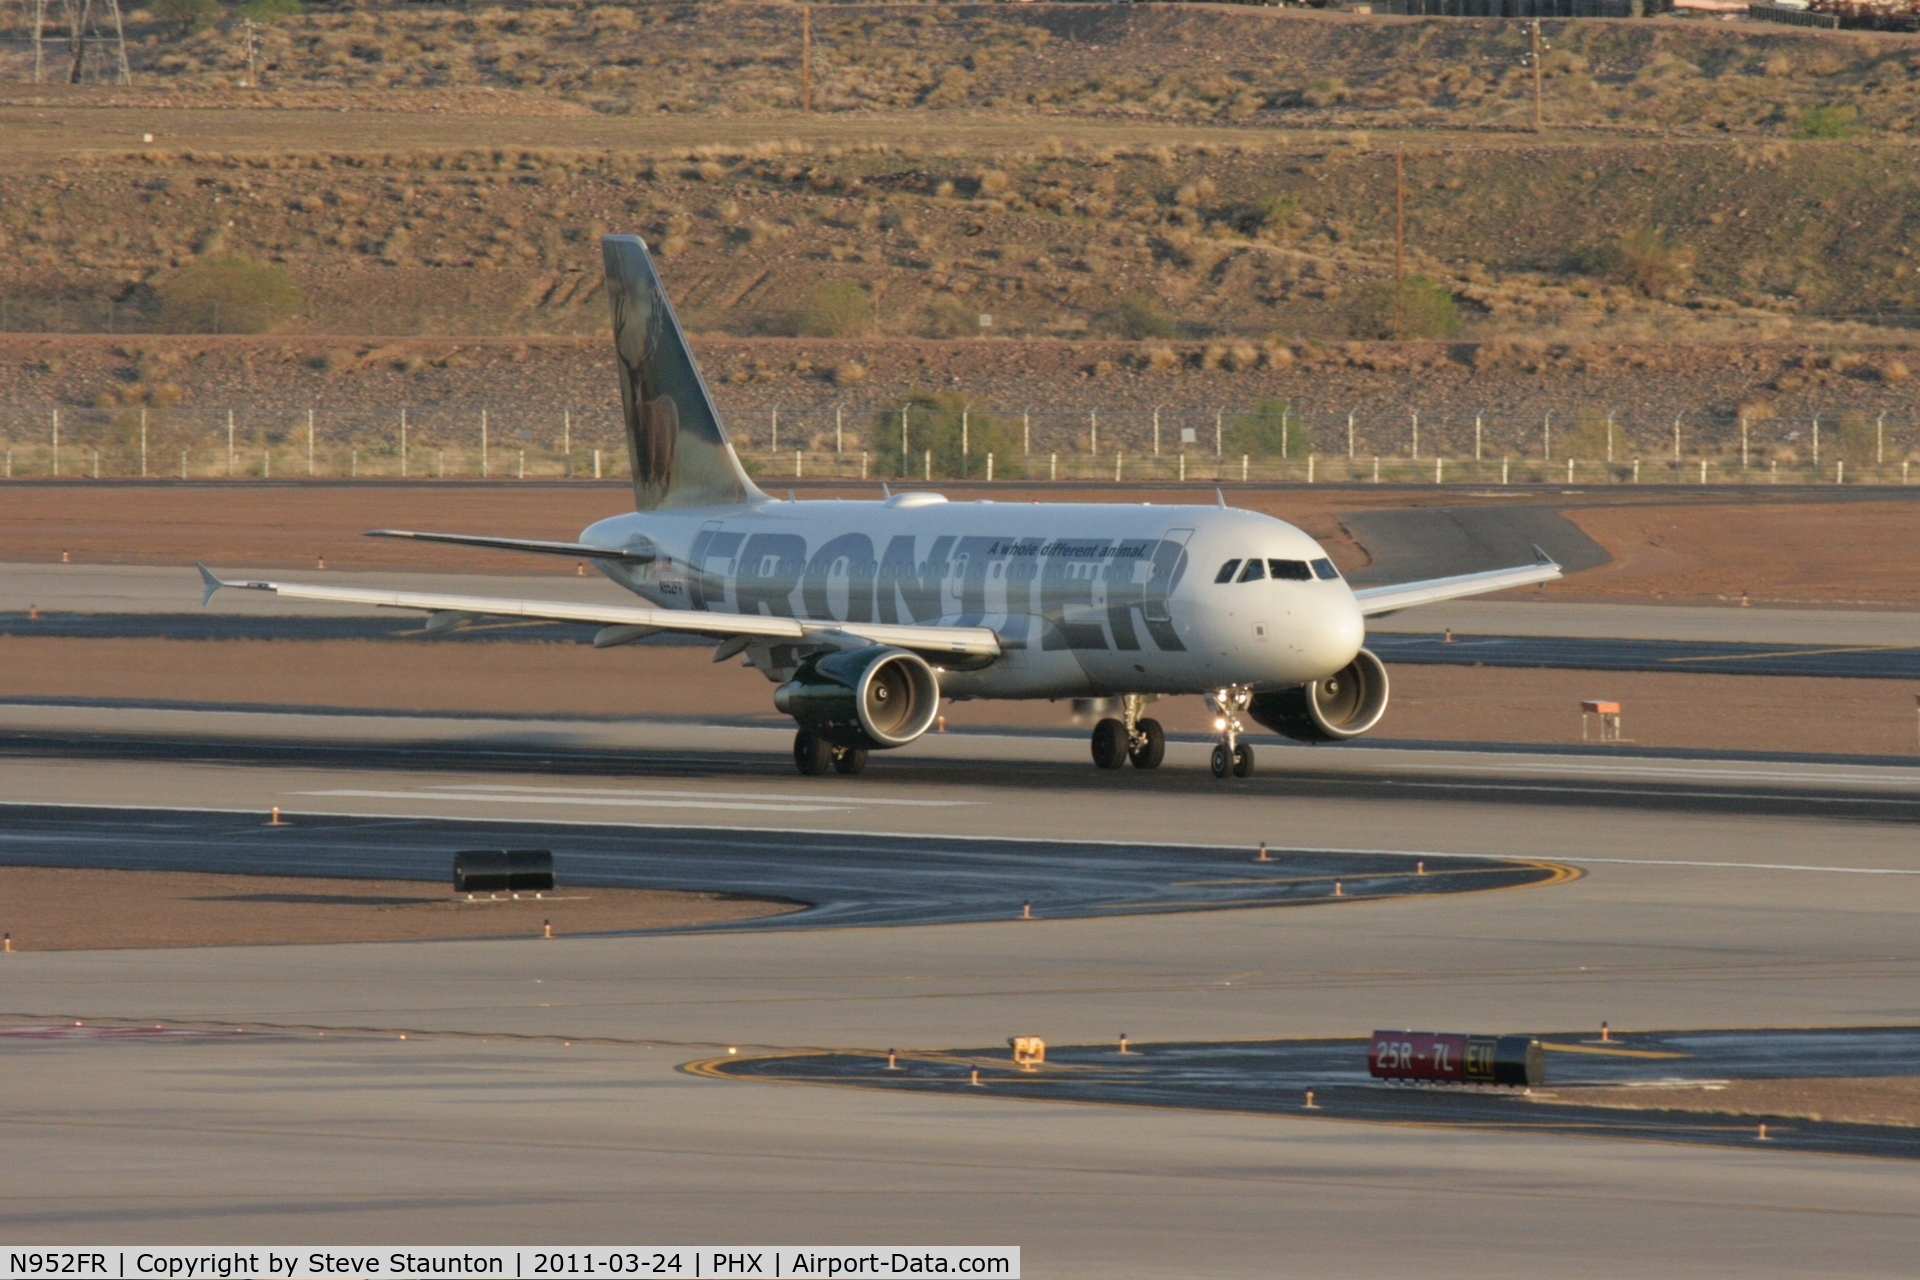 N952FR, 2010 Airbus A319-112 C/N 4204, Taken at Phoenix Sky Harbor Airport, in March 2011 whilst on an Aeroprint Aviation tour